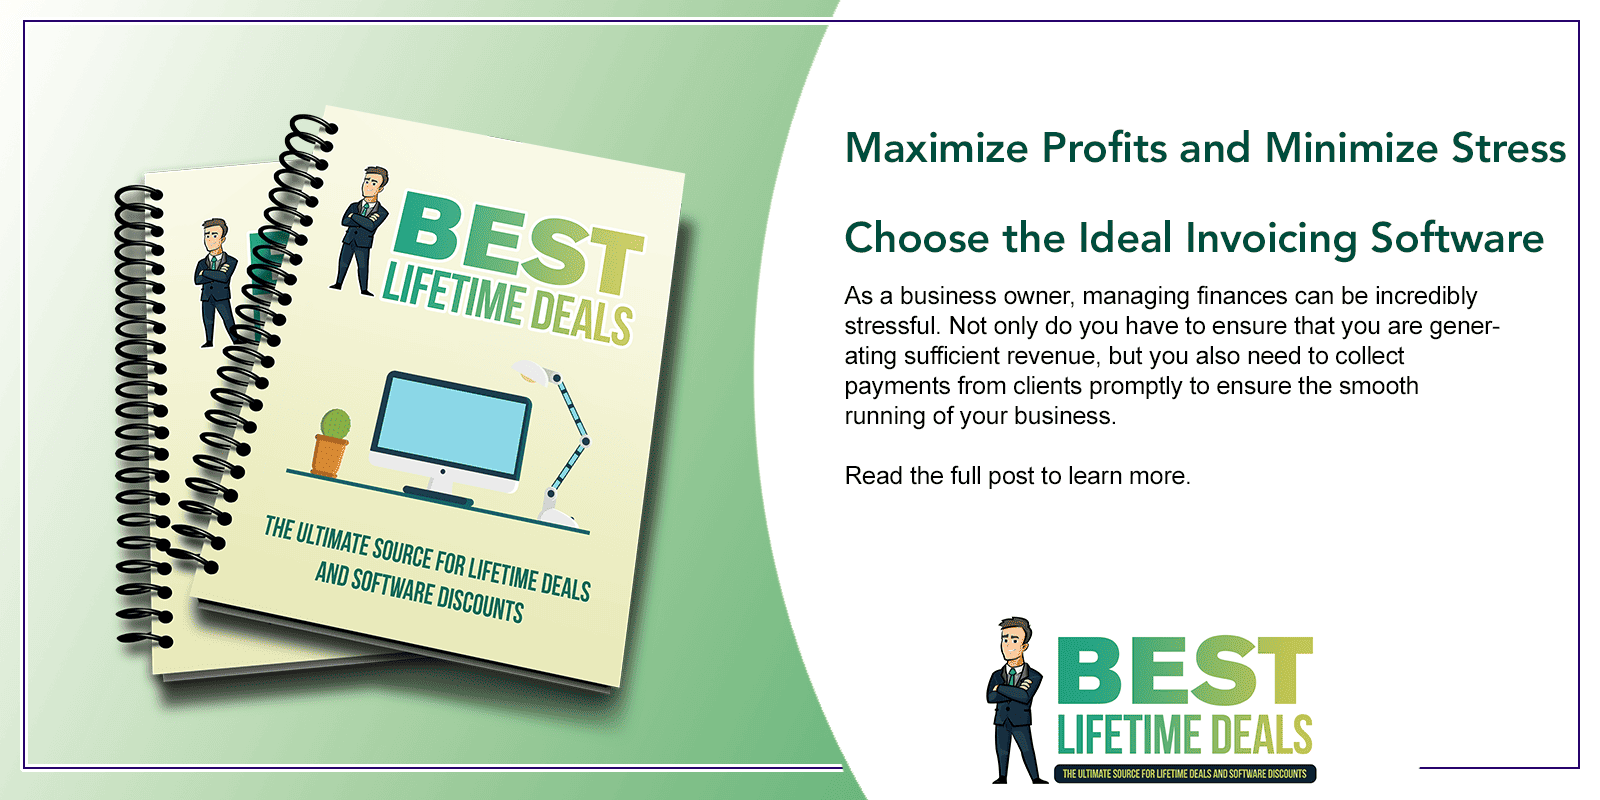 Maximize Profits and Minimize Stress Choose the Ideal Invoicing Software